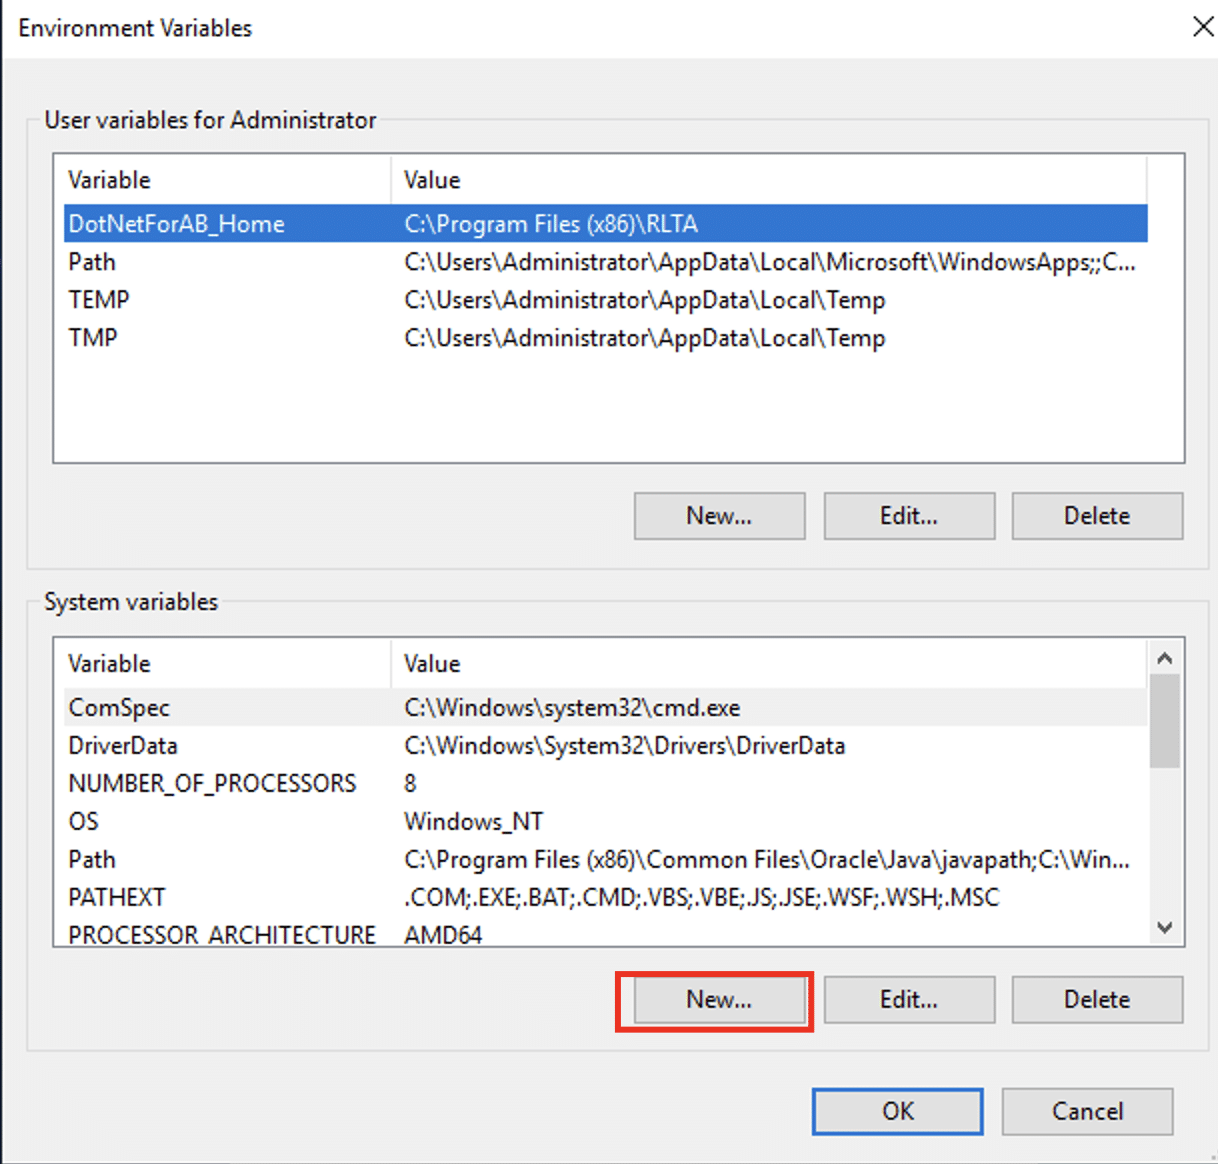 Select New in the System variables section to add a new system environment variable.